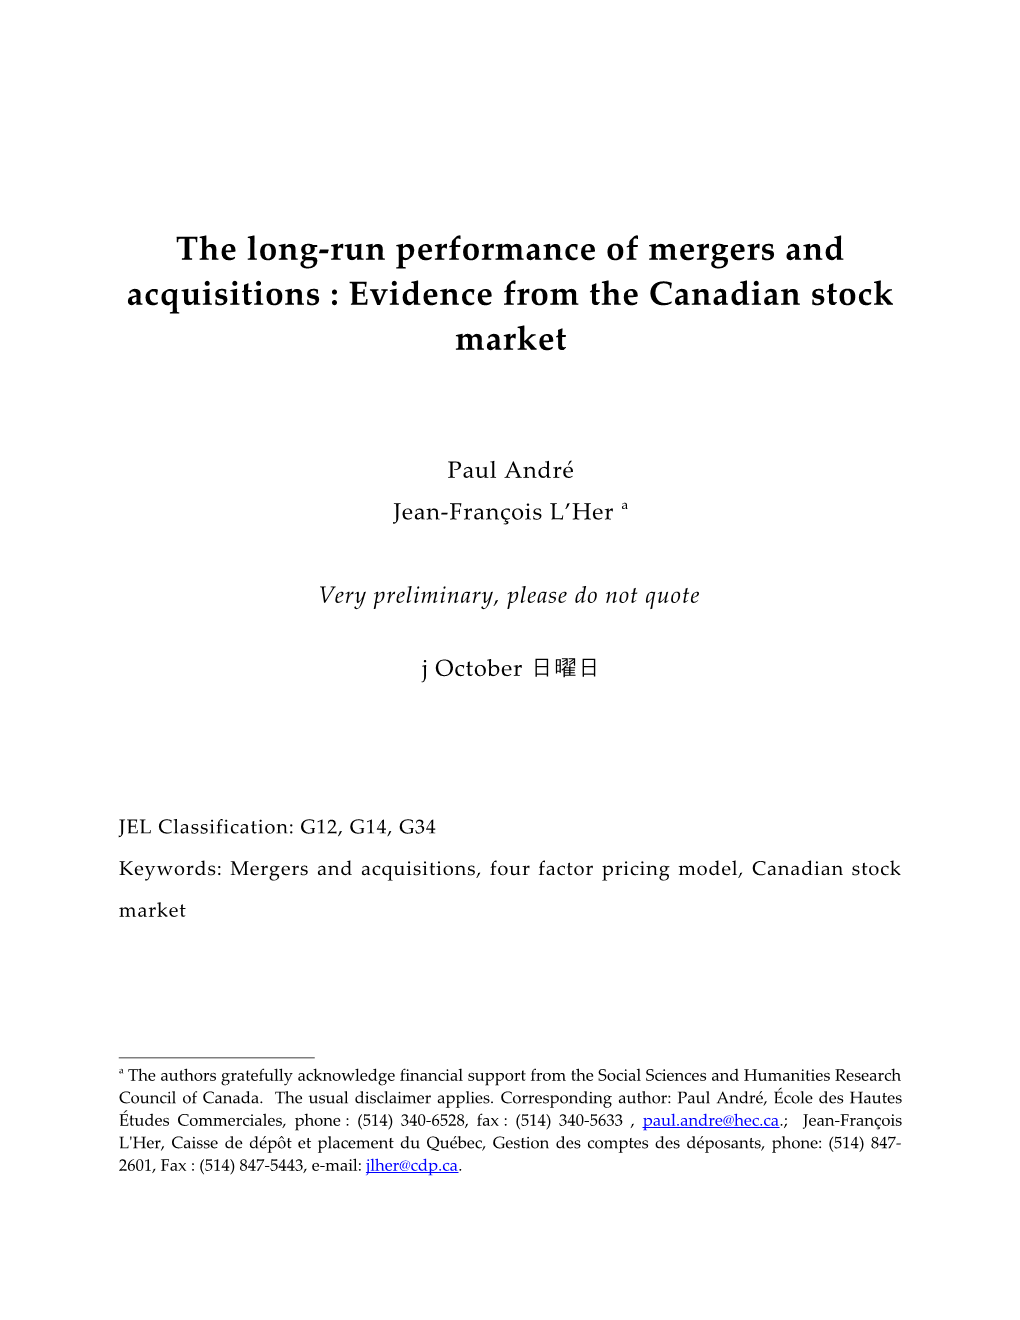 Evidence from a Four-Factor Pricing Model in the Canadian Stock Market